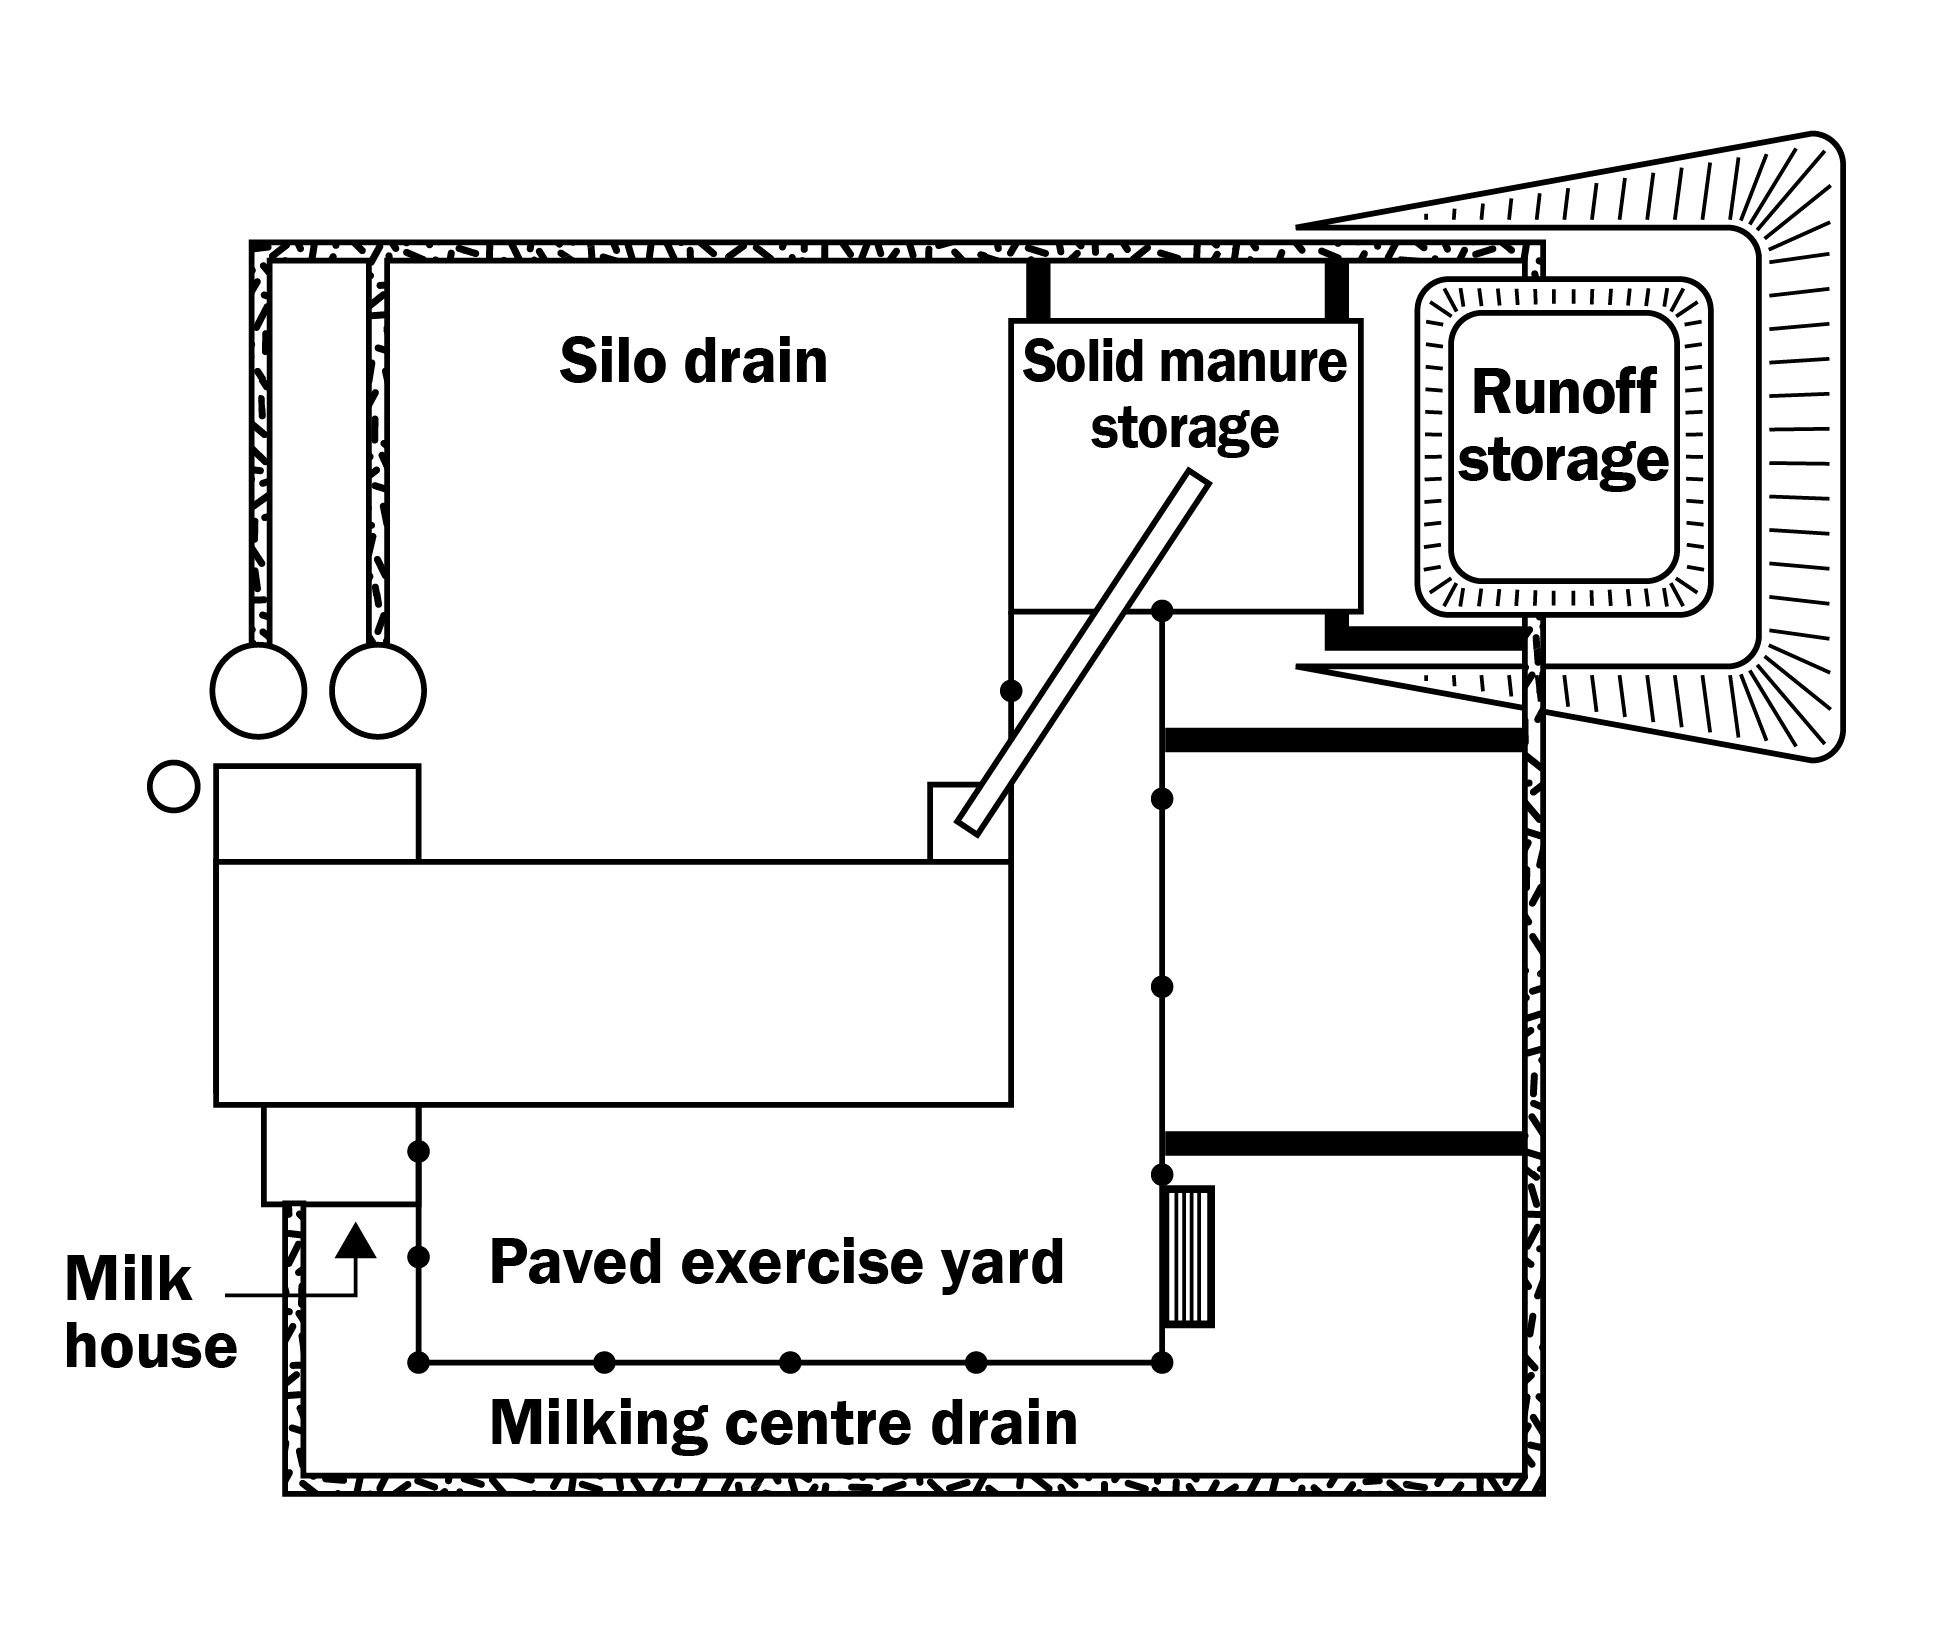 A drawing of a common dairy operation that includes yards, drains and the milking centre. The drawing shows that washwater can be added to a manure runoff storage as a method of management.